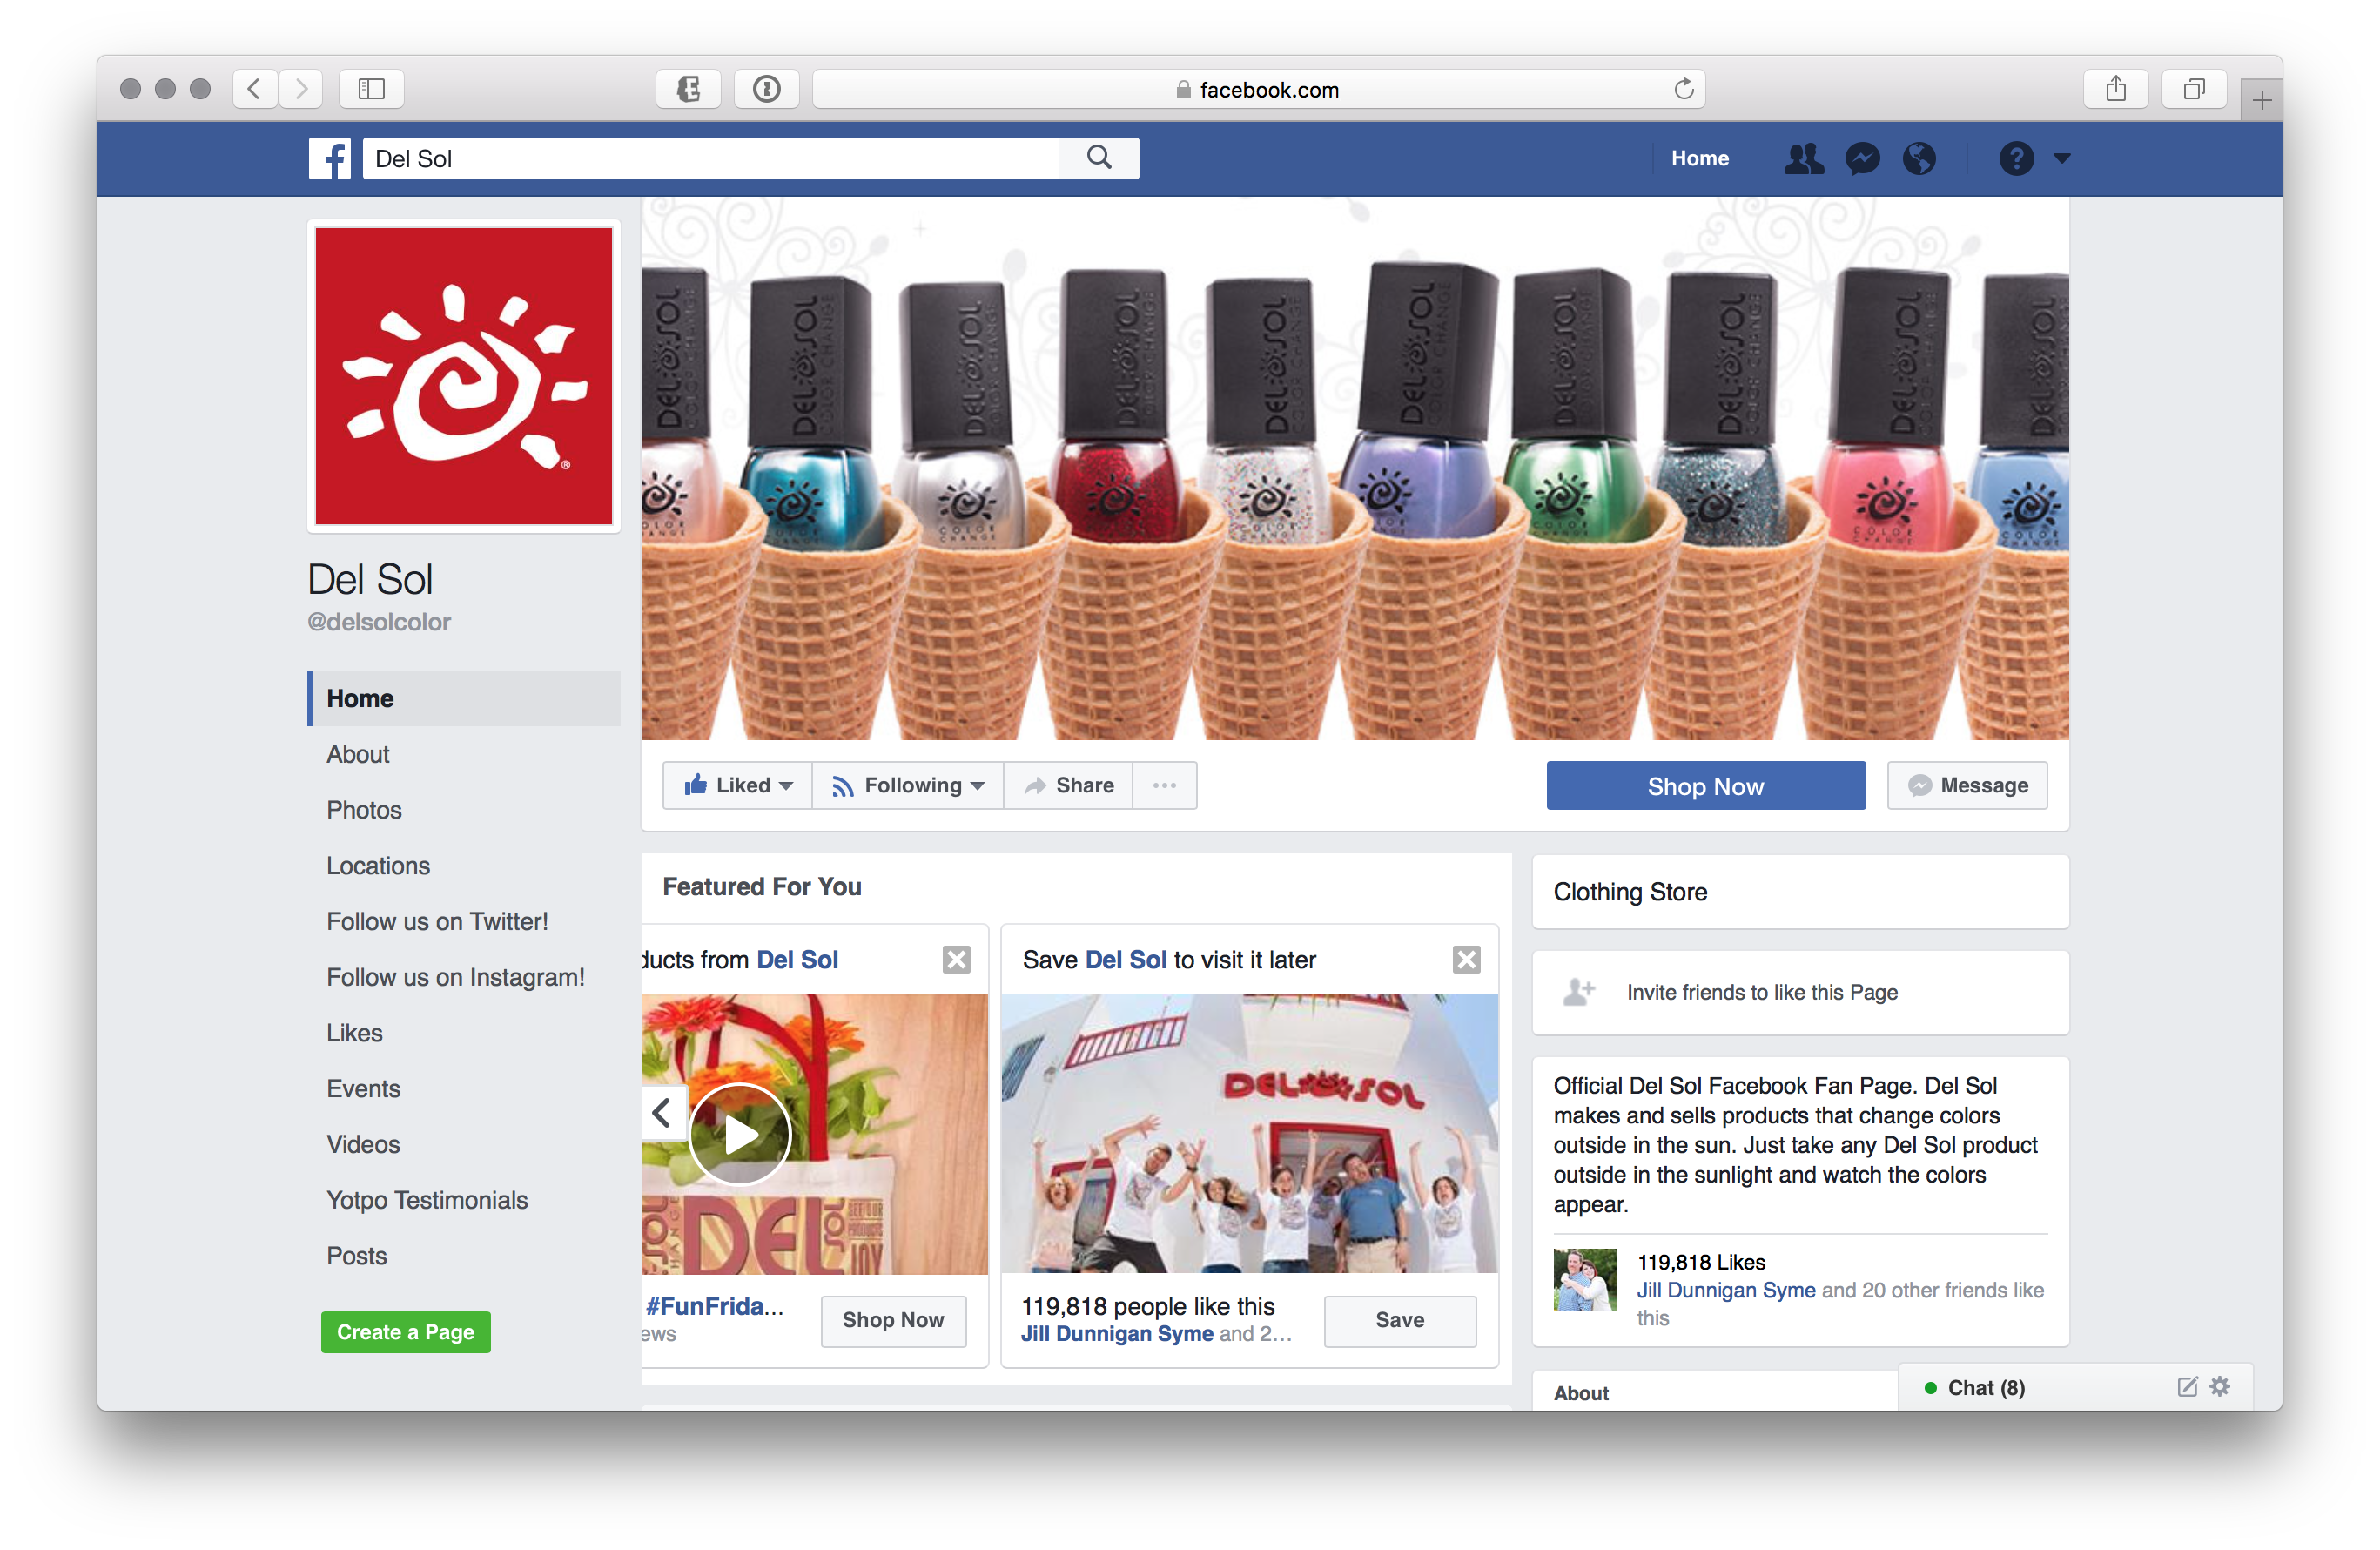 Created new cover photo for Corporate Facebook page to show off our Winter Nail Polish Collection.